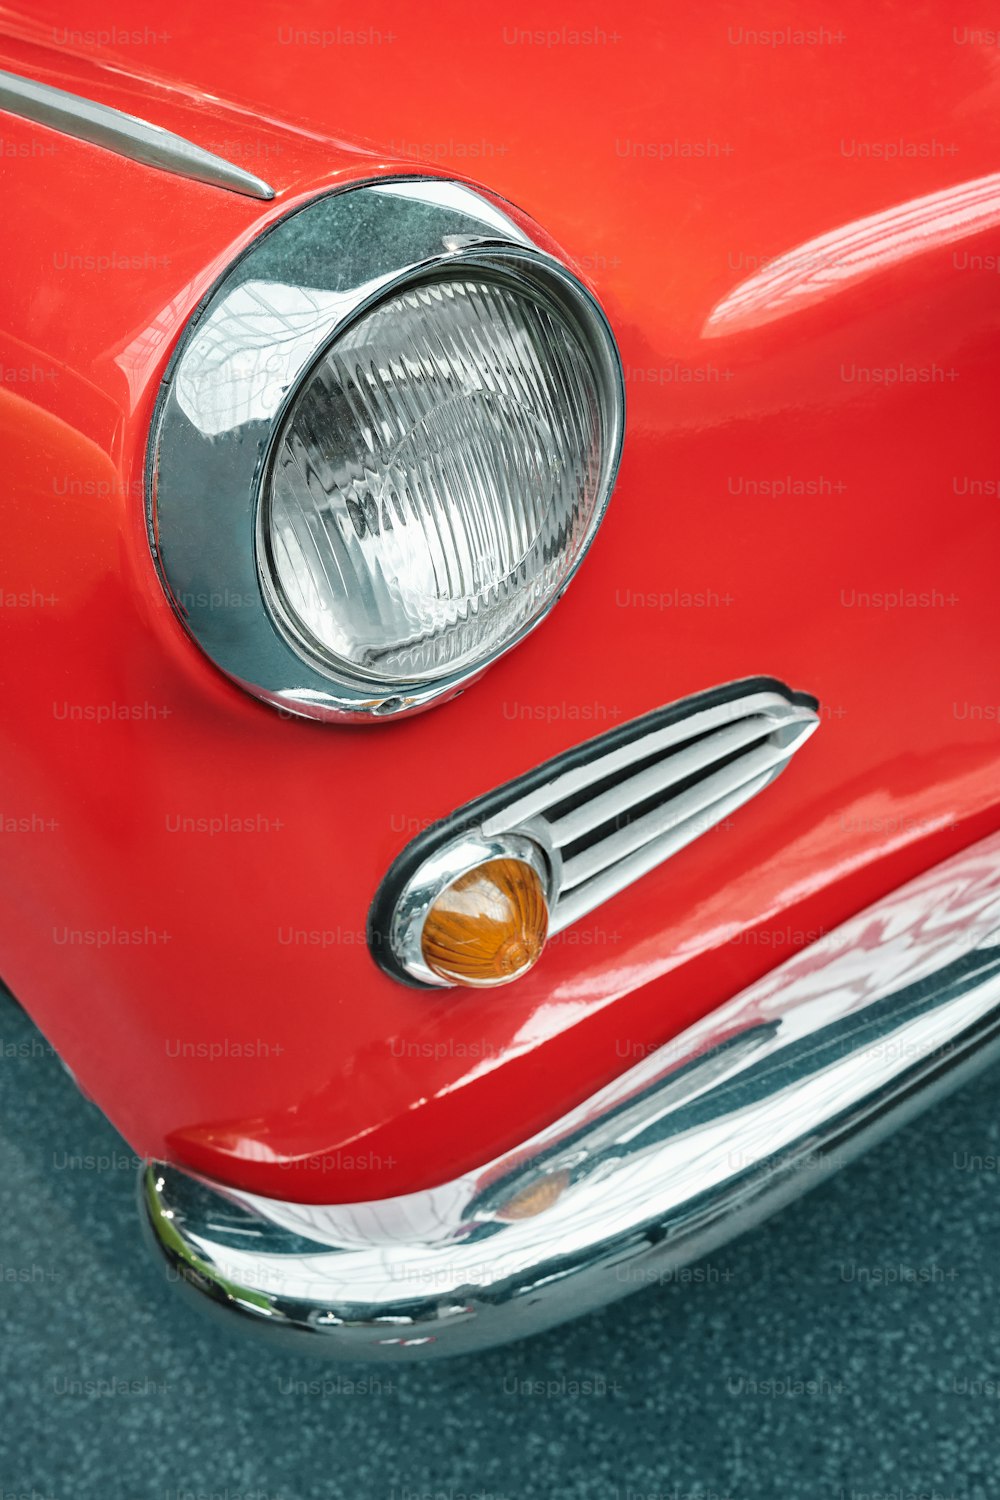 a close up of a red car headlight